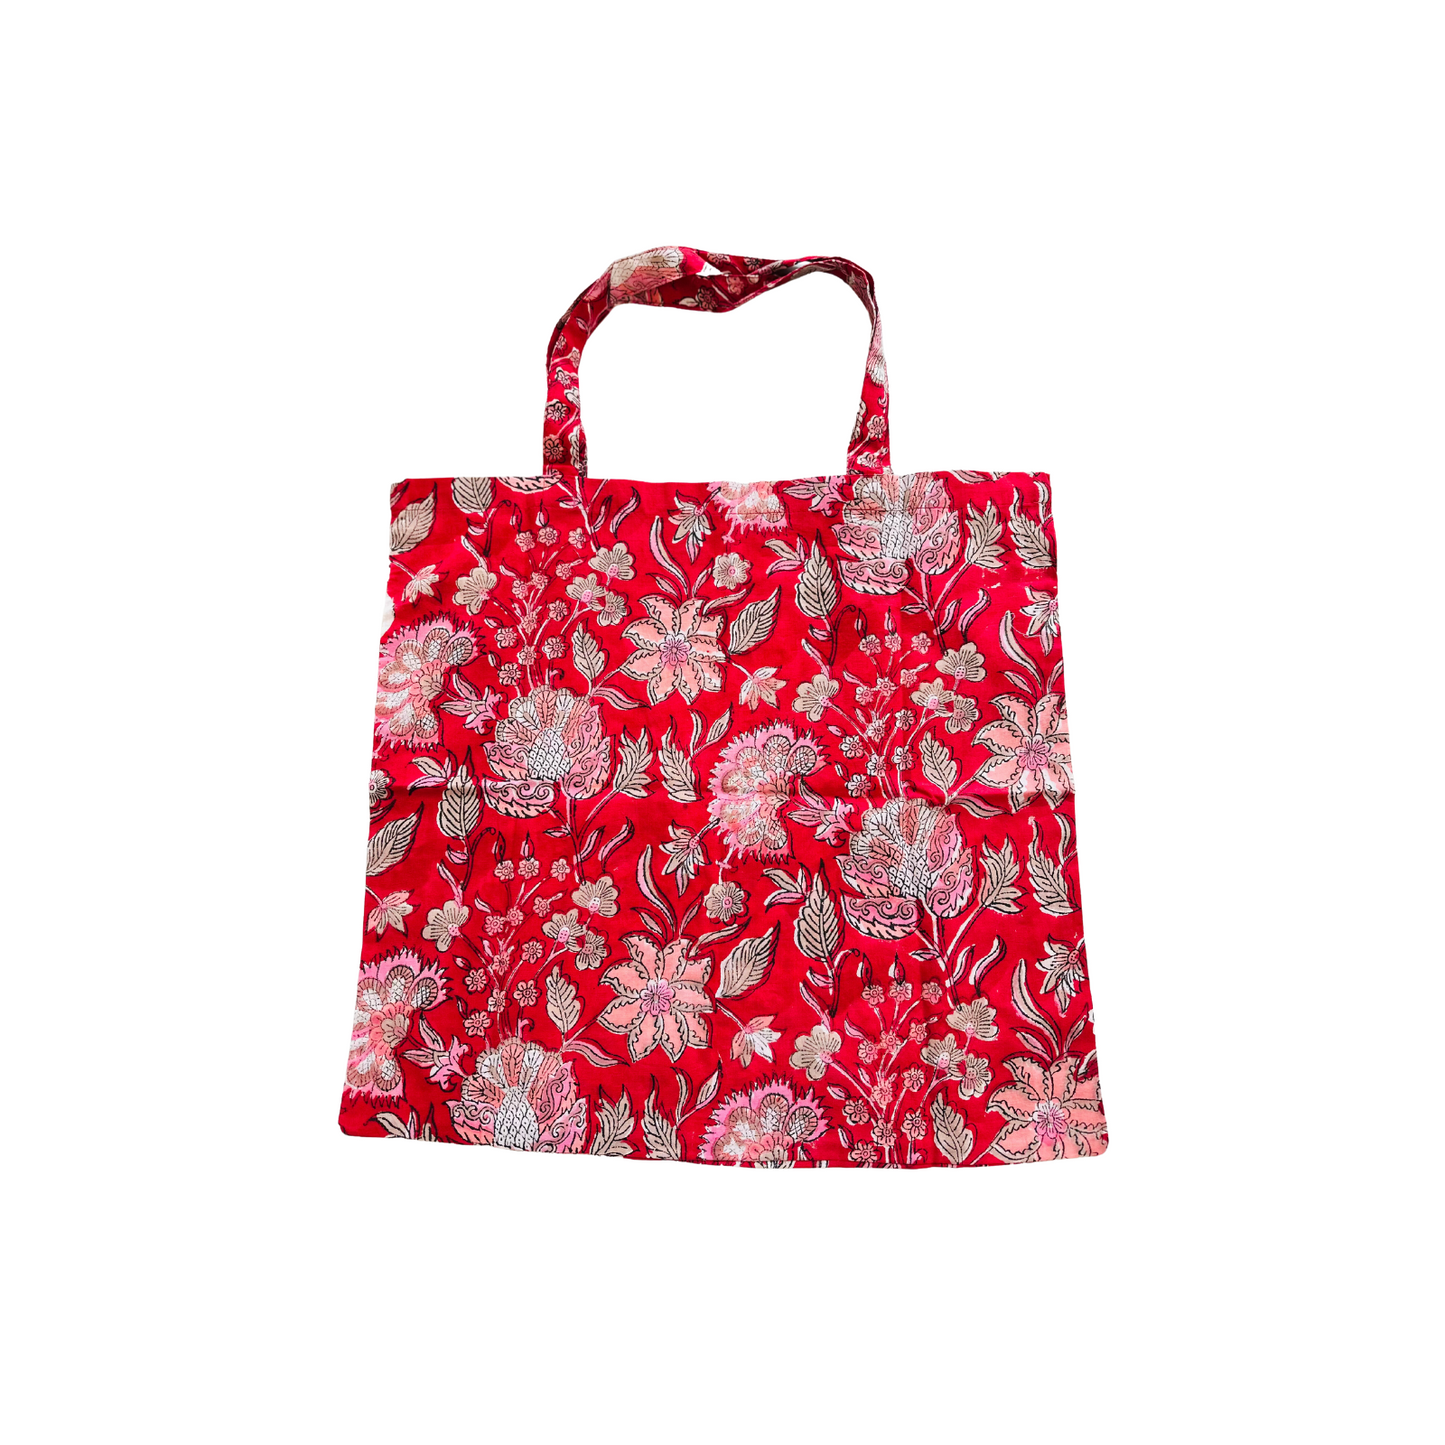 Indy Home Fabric Tote Bag